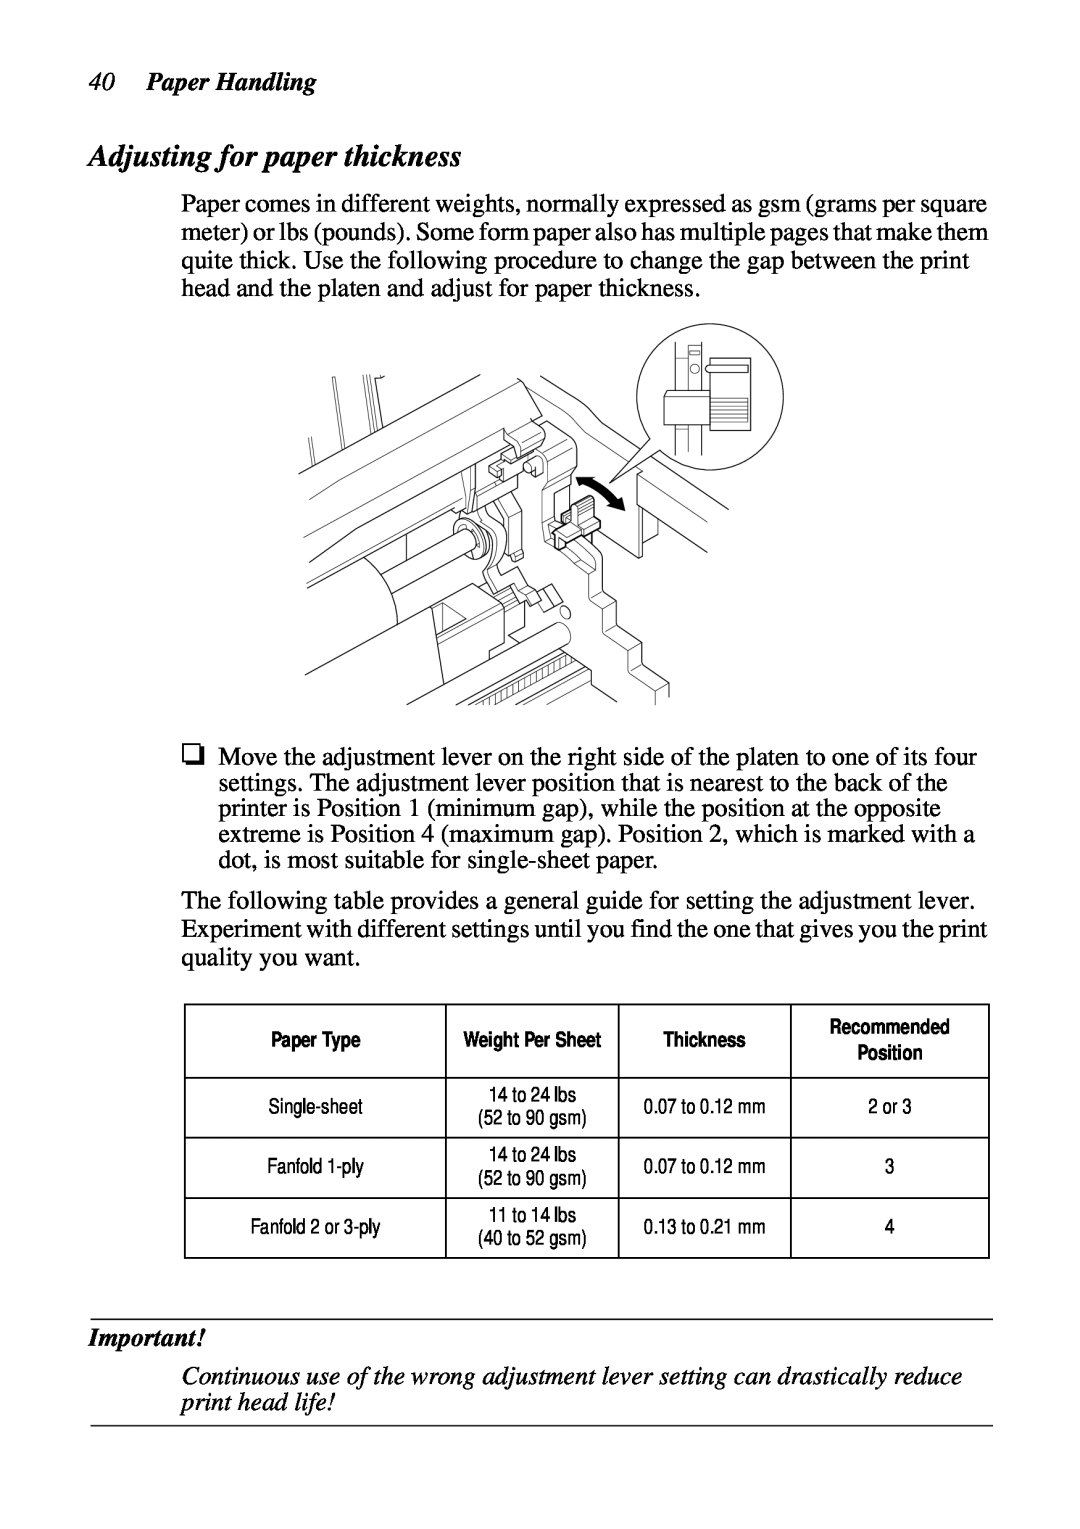 Star Micronics LC-90 NX-1010 user manual Adjusting for paper thickness, Paper Handling 